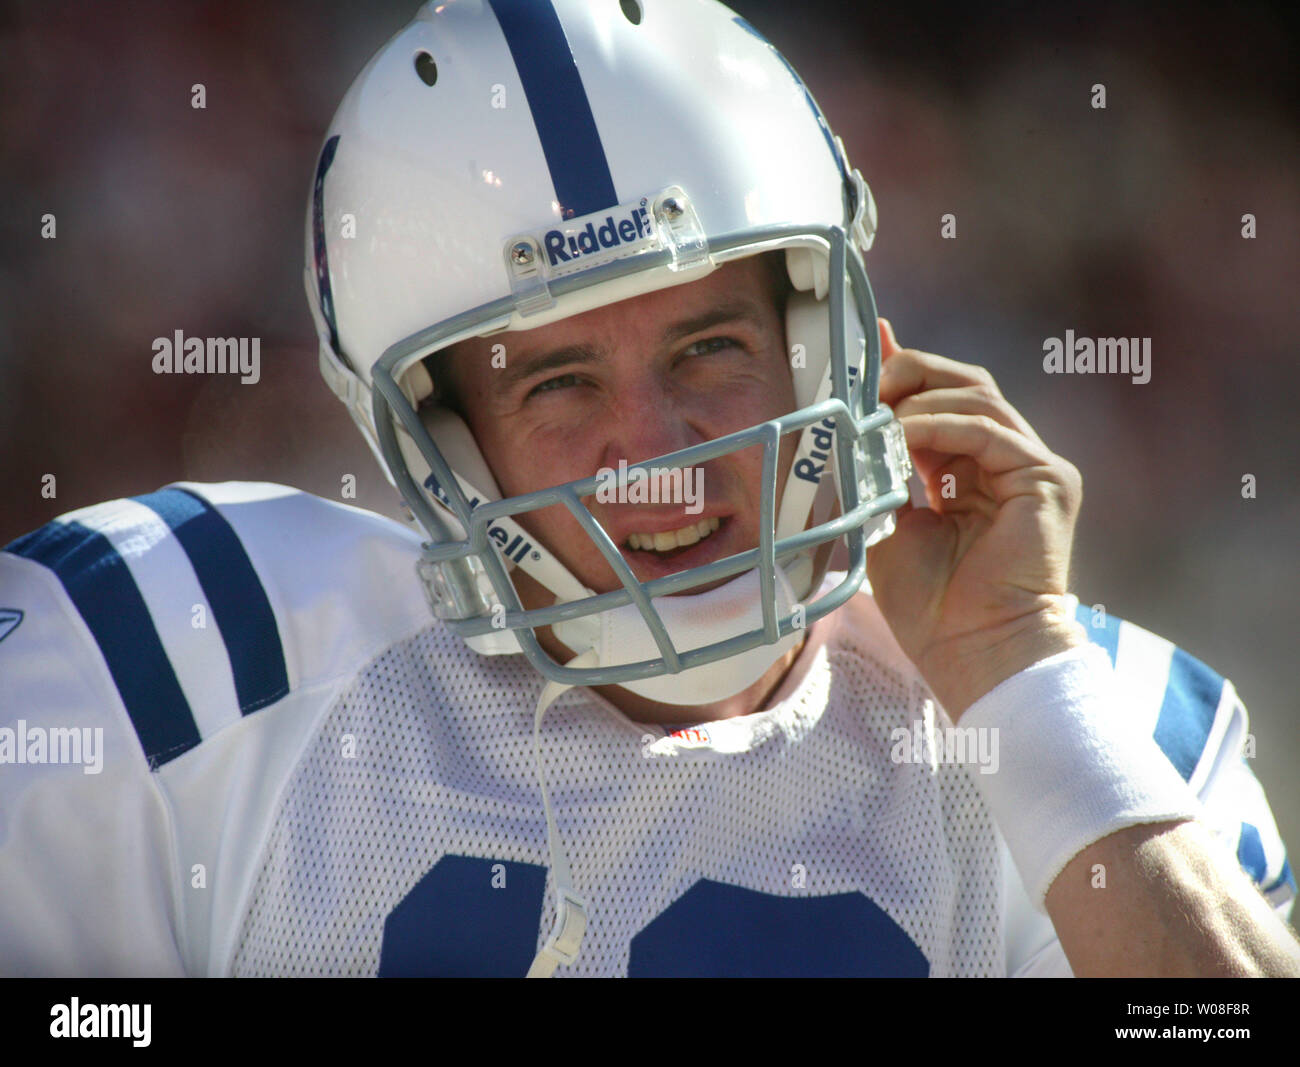 Indianapolis Colts QB Peyton Manning snaps on his helmet to  play against the San Francisco 49ers at Monster Park in San Francisco on October 9, 2005.  (UPI Photo/Terry Schmitt)) Stock Photo